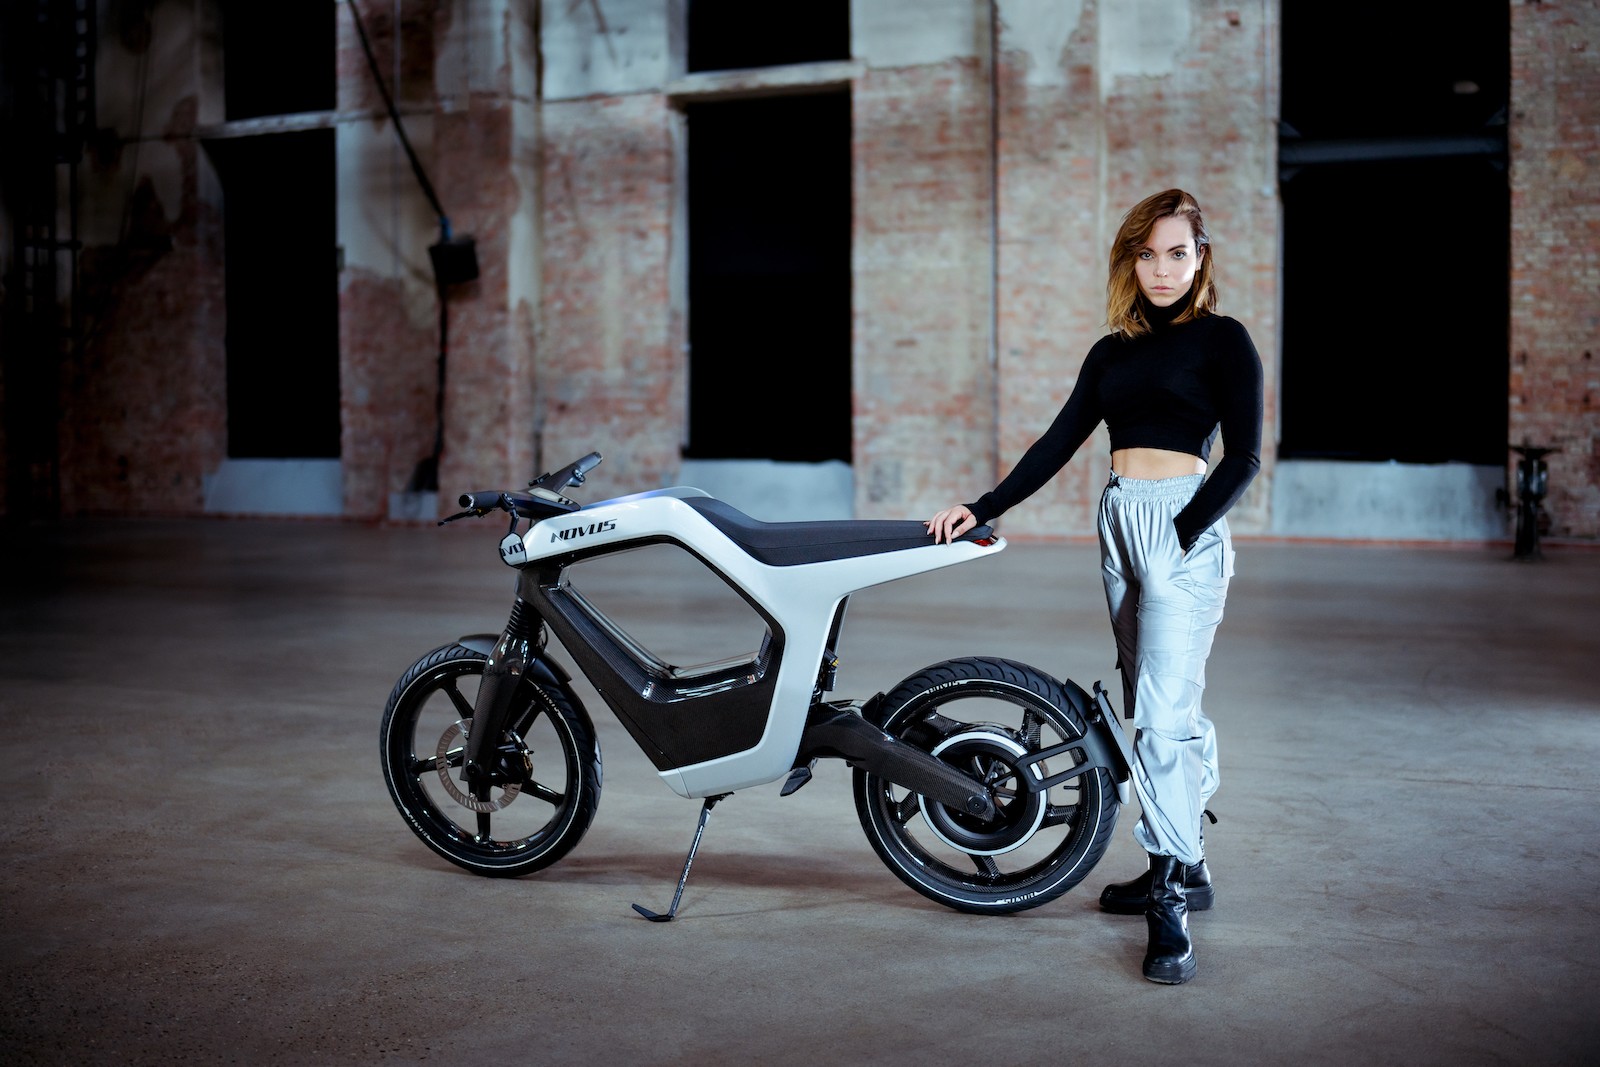 Novus Opens One E-Bike Preorders With Deliveries Set For Mid-2022